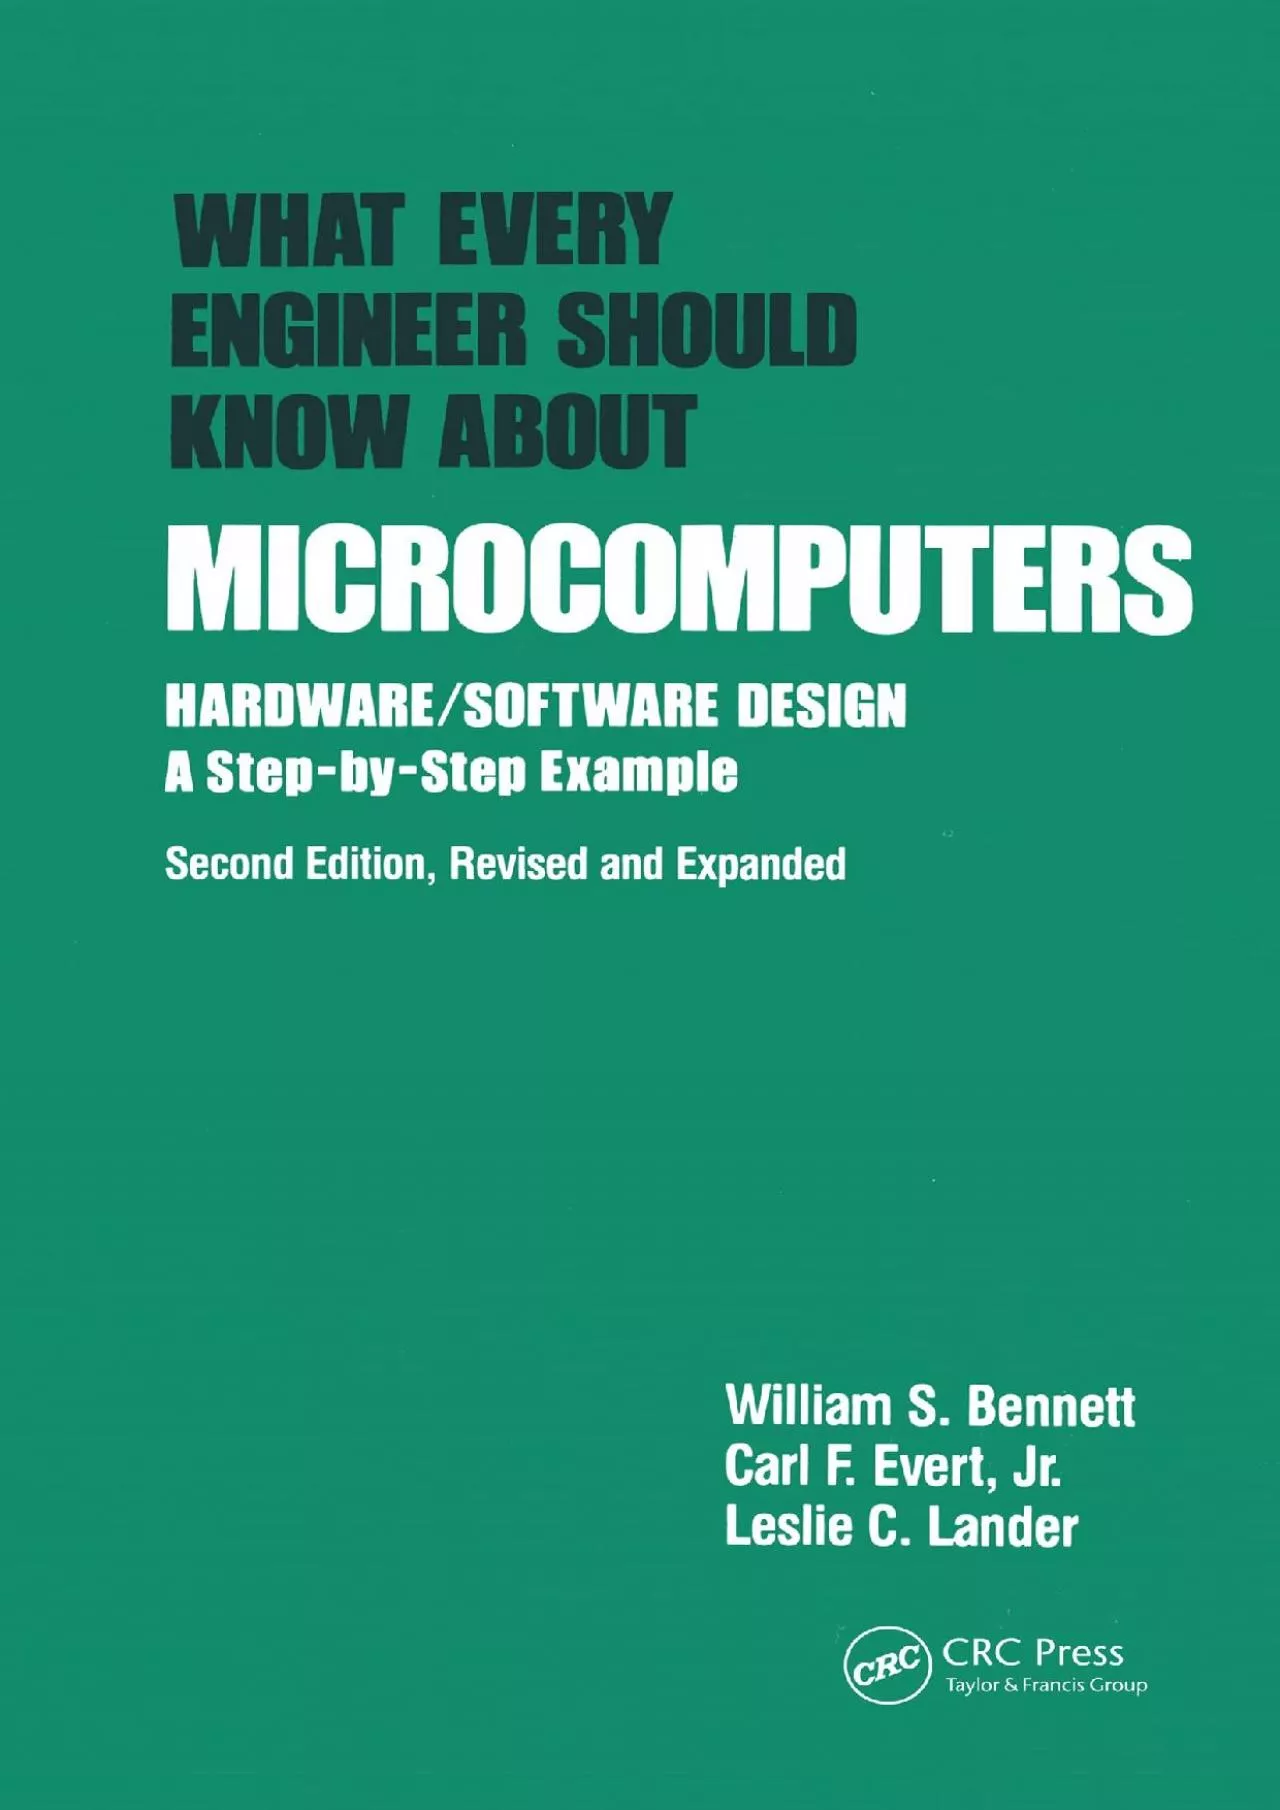 [BEST]-What Every Engineer Should Know about Microcomputers: Hardware/Software Design: